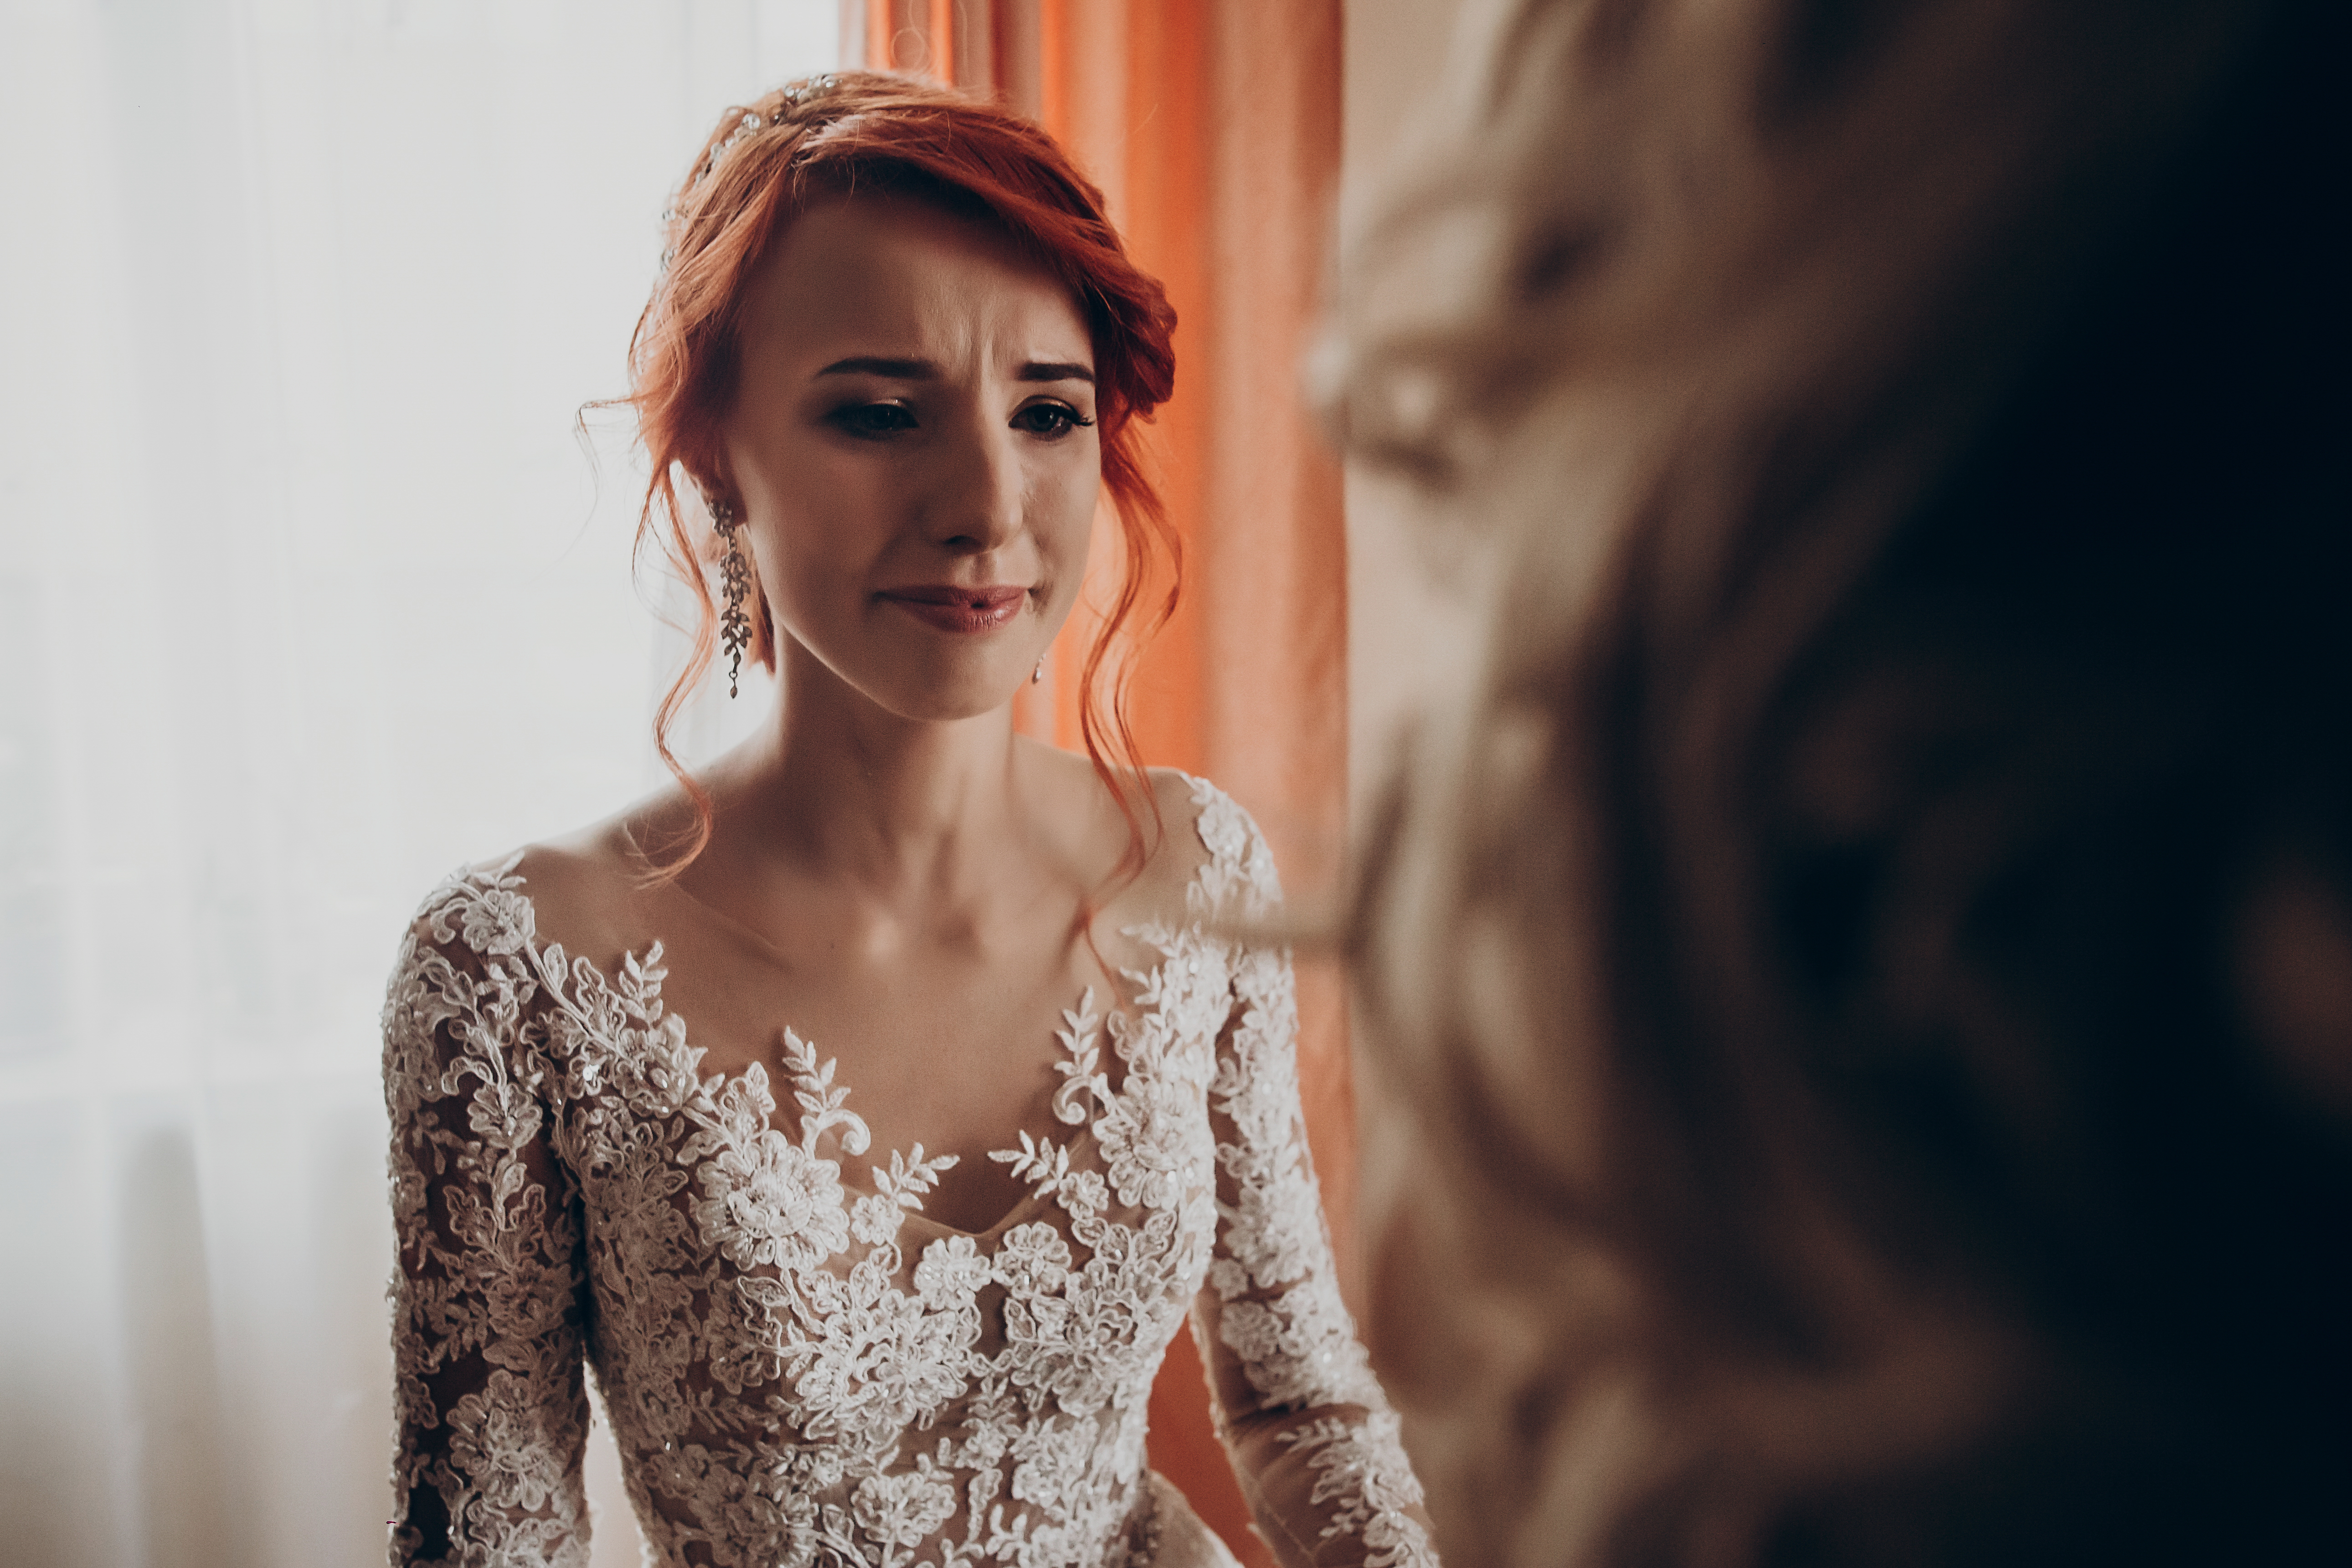 A bride tears down while looking at her family | Source: Shutterstock